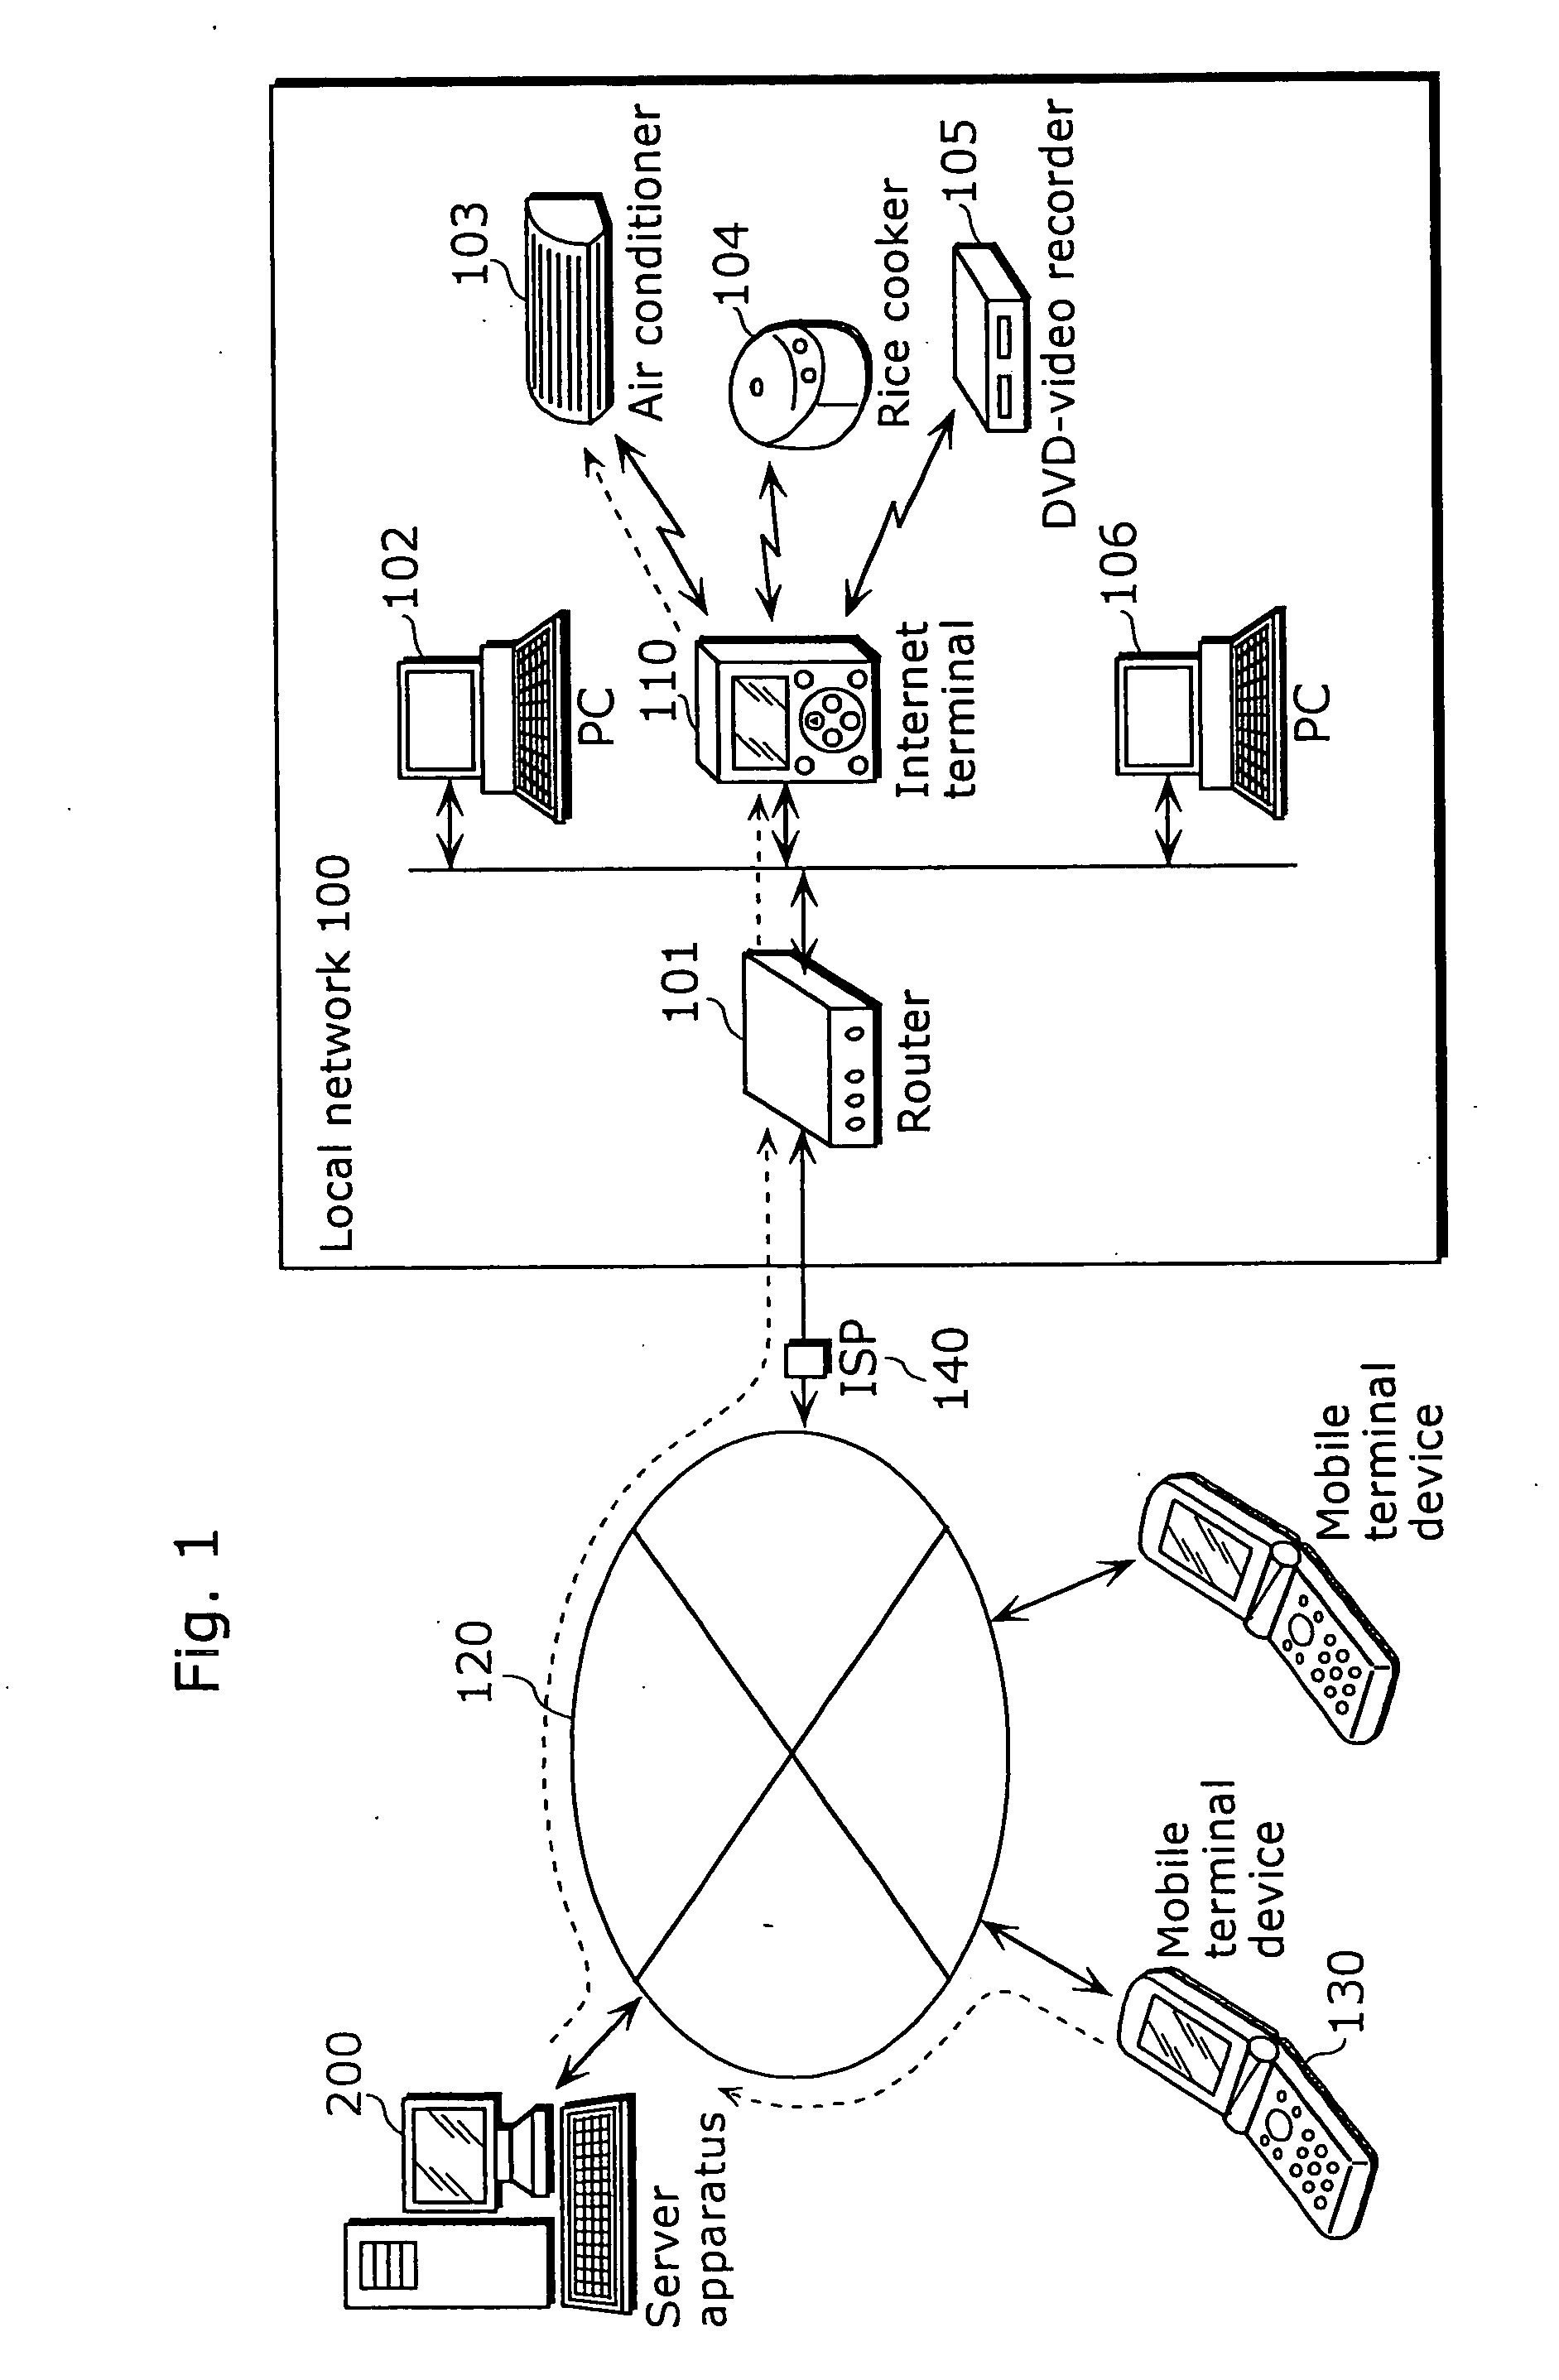 Apparatus, method and computer software products for controlling a home terminal